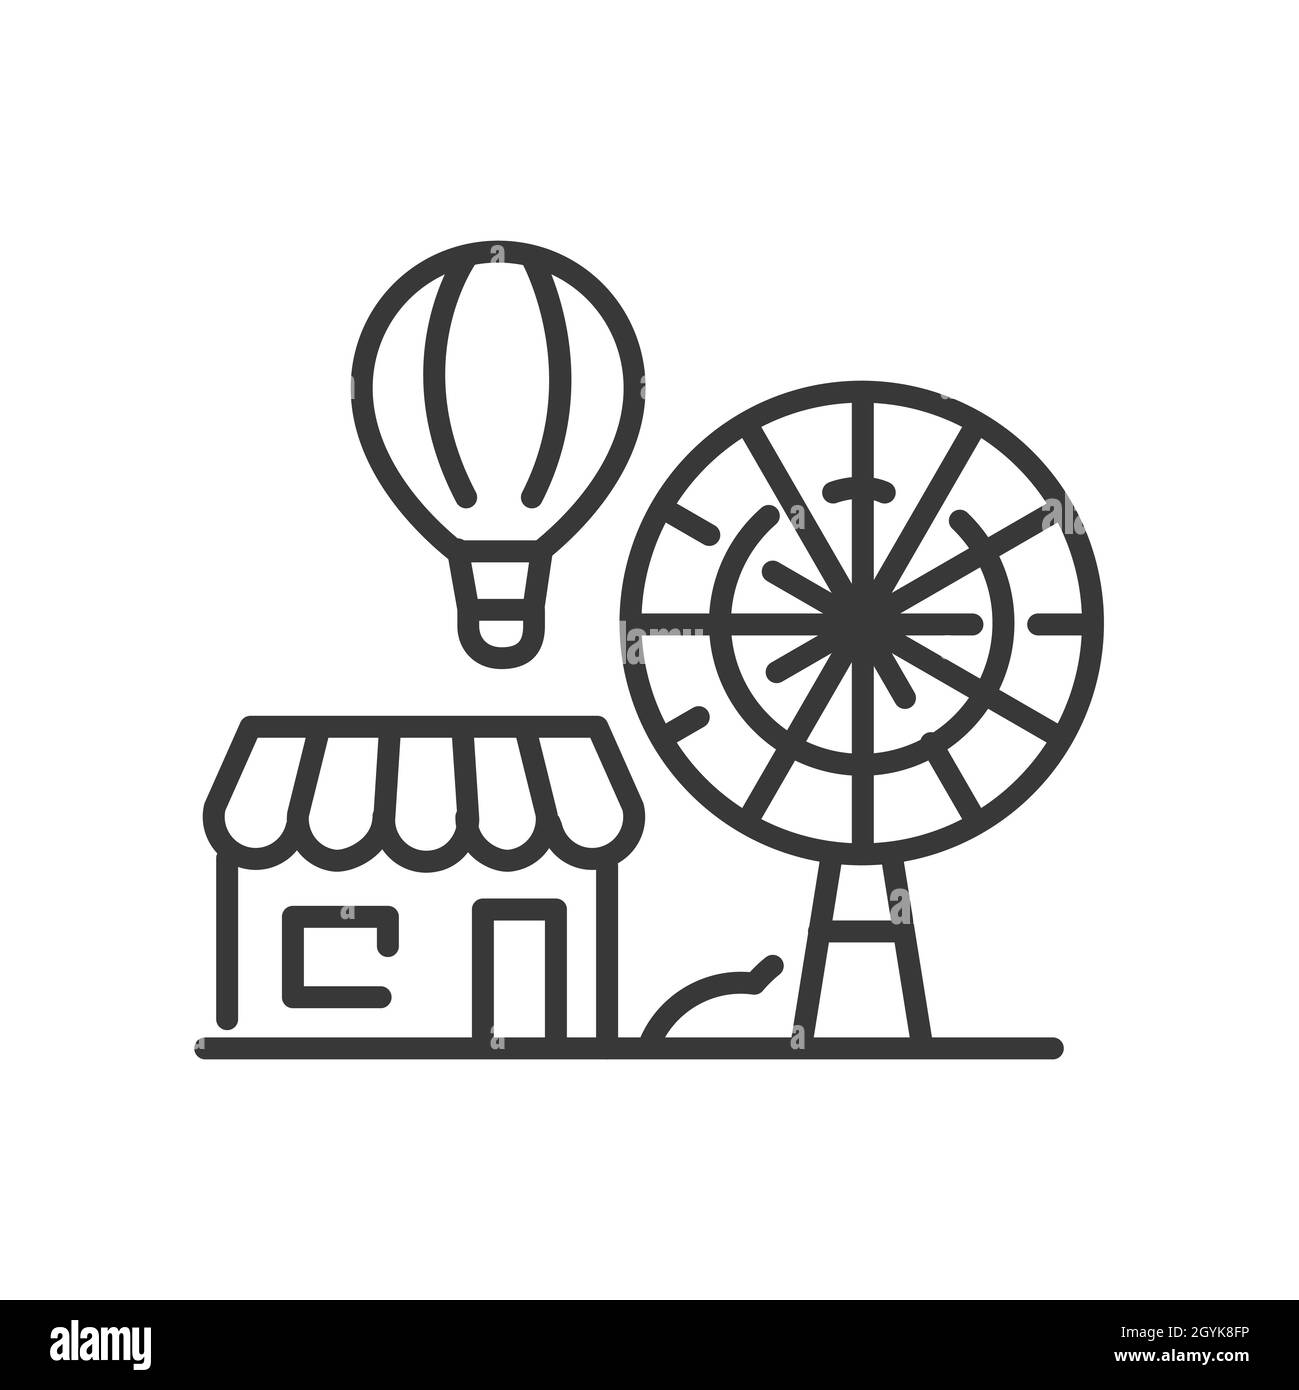 Rides at the fair - vector line design single isolated icon on white background. High quality black pictogram. Fun city entertainments. Ferris wheel r Stock Vector